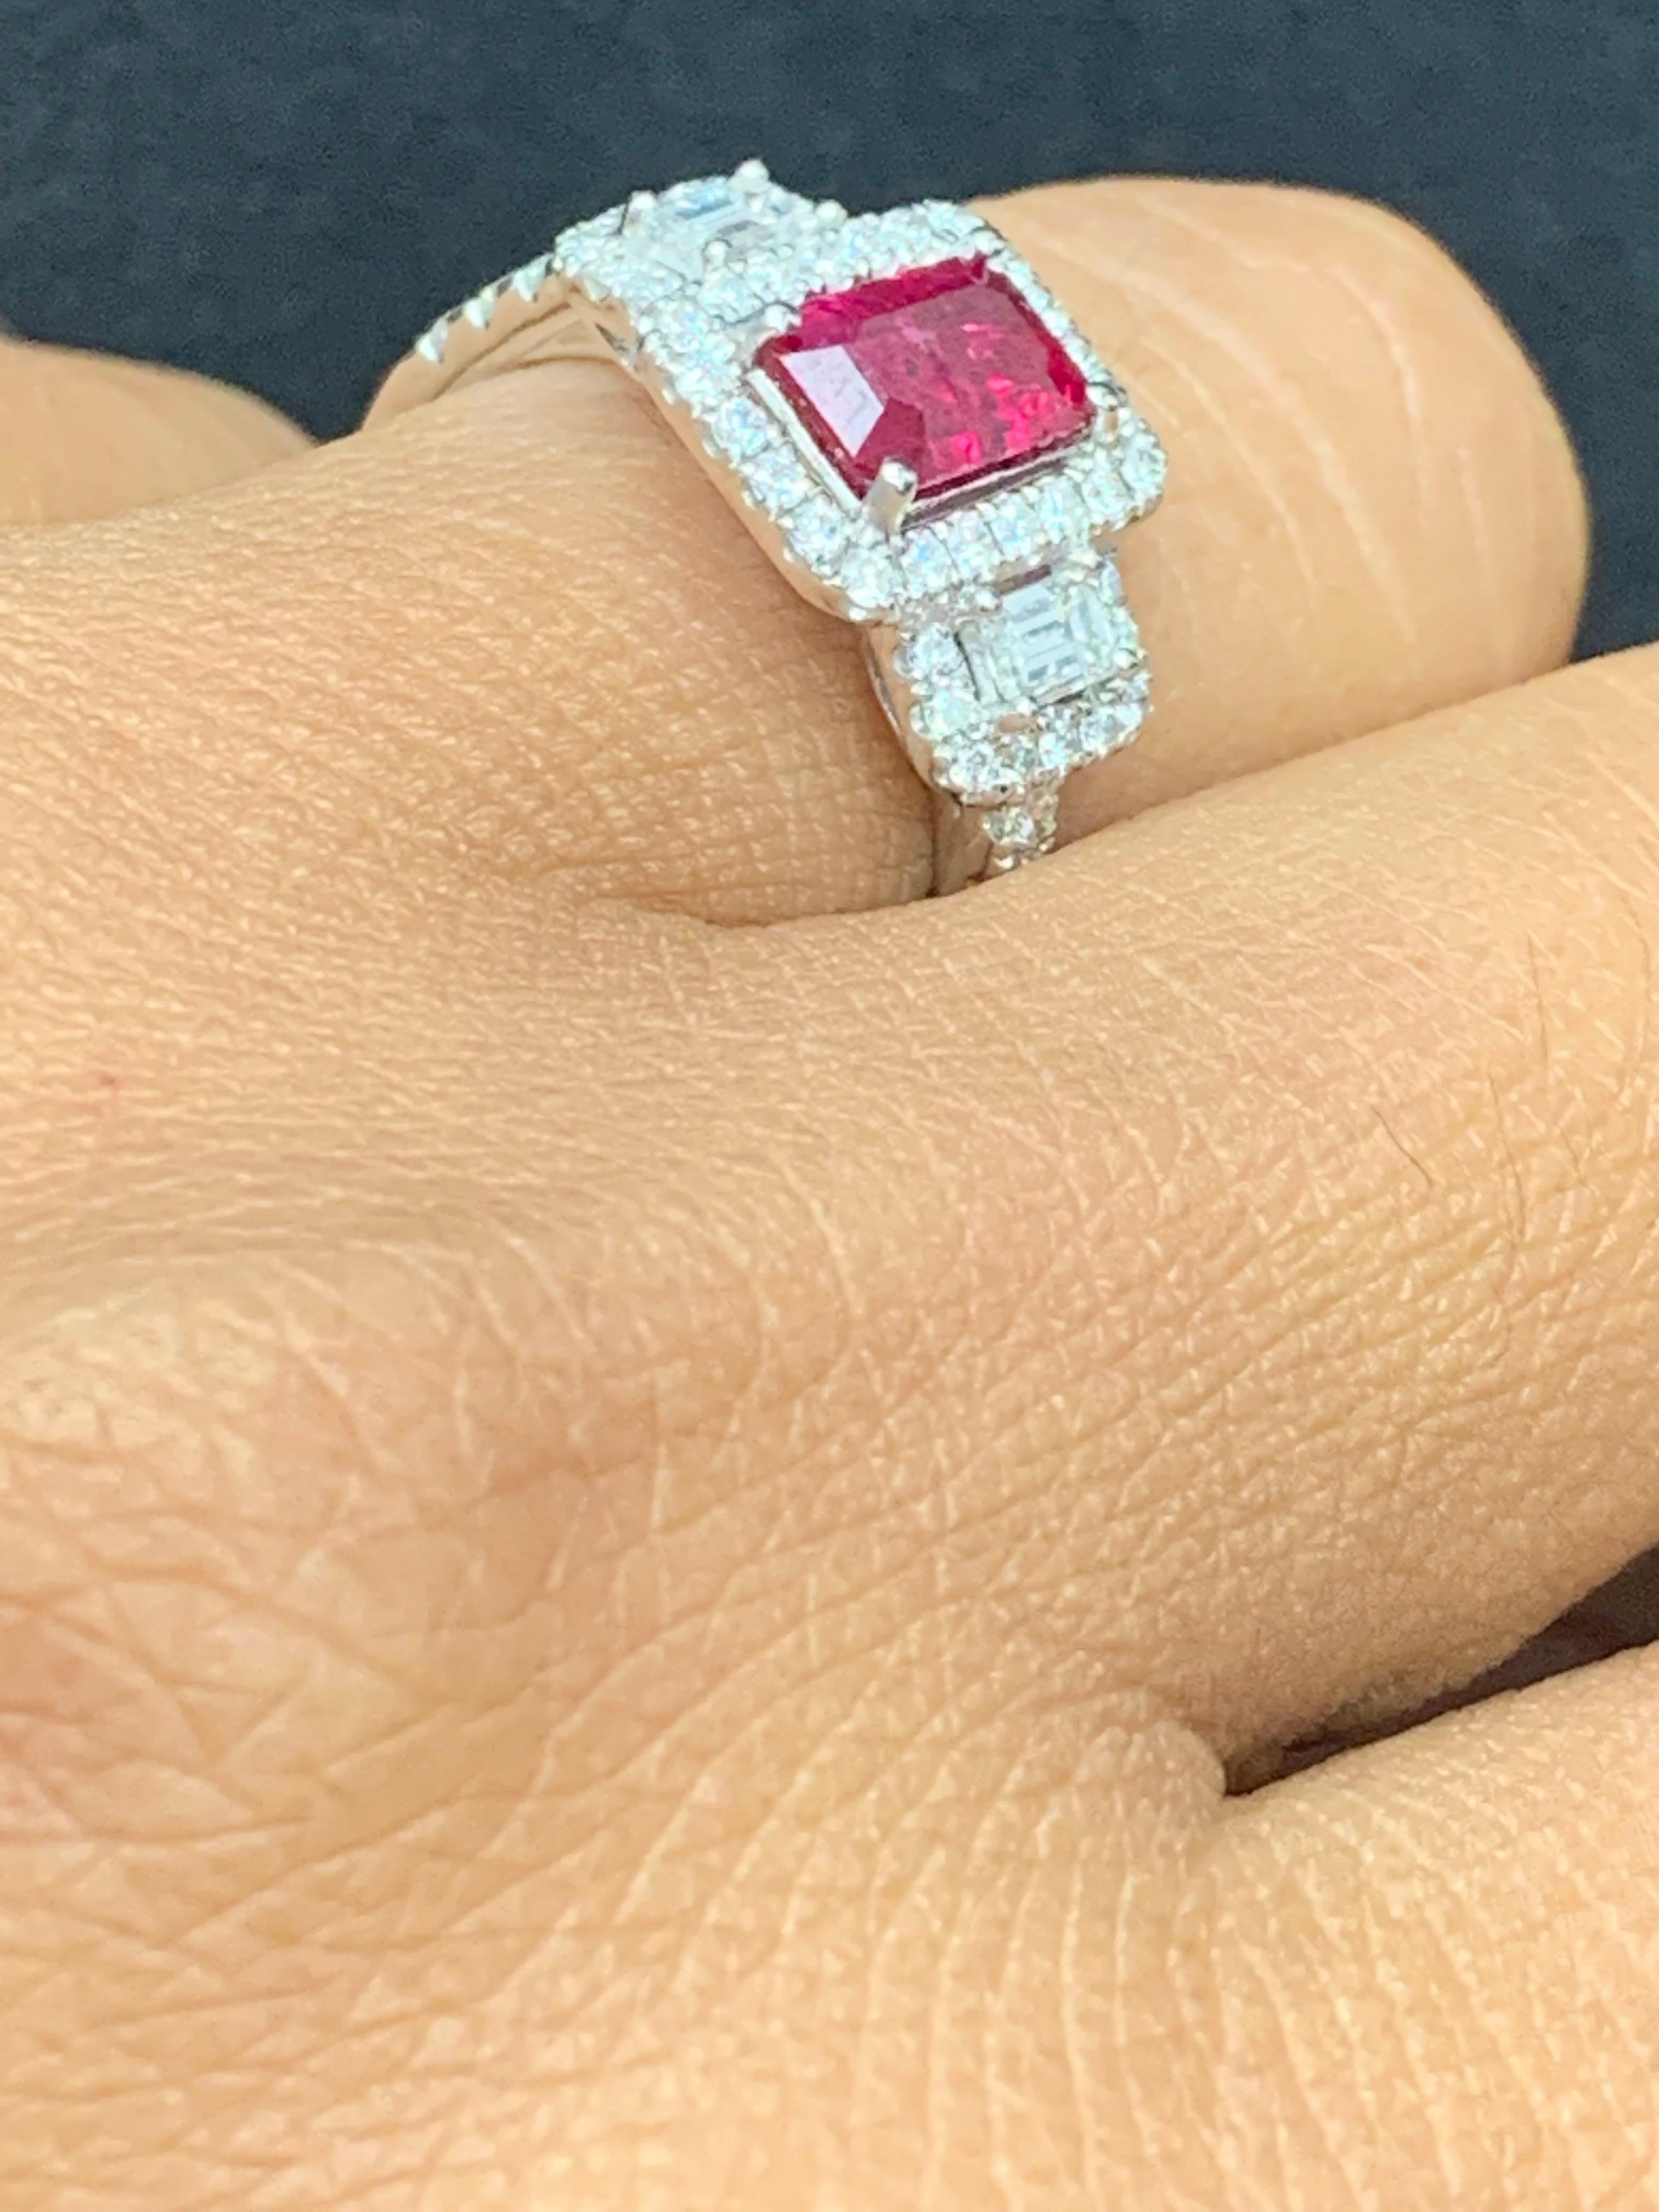 0.85 Carat Emerald Cut Ruby Diamond Engagement Ring in 18K White Gold For Sale 8